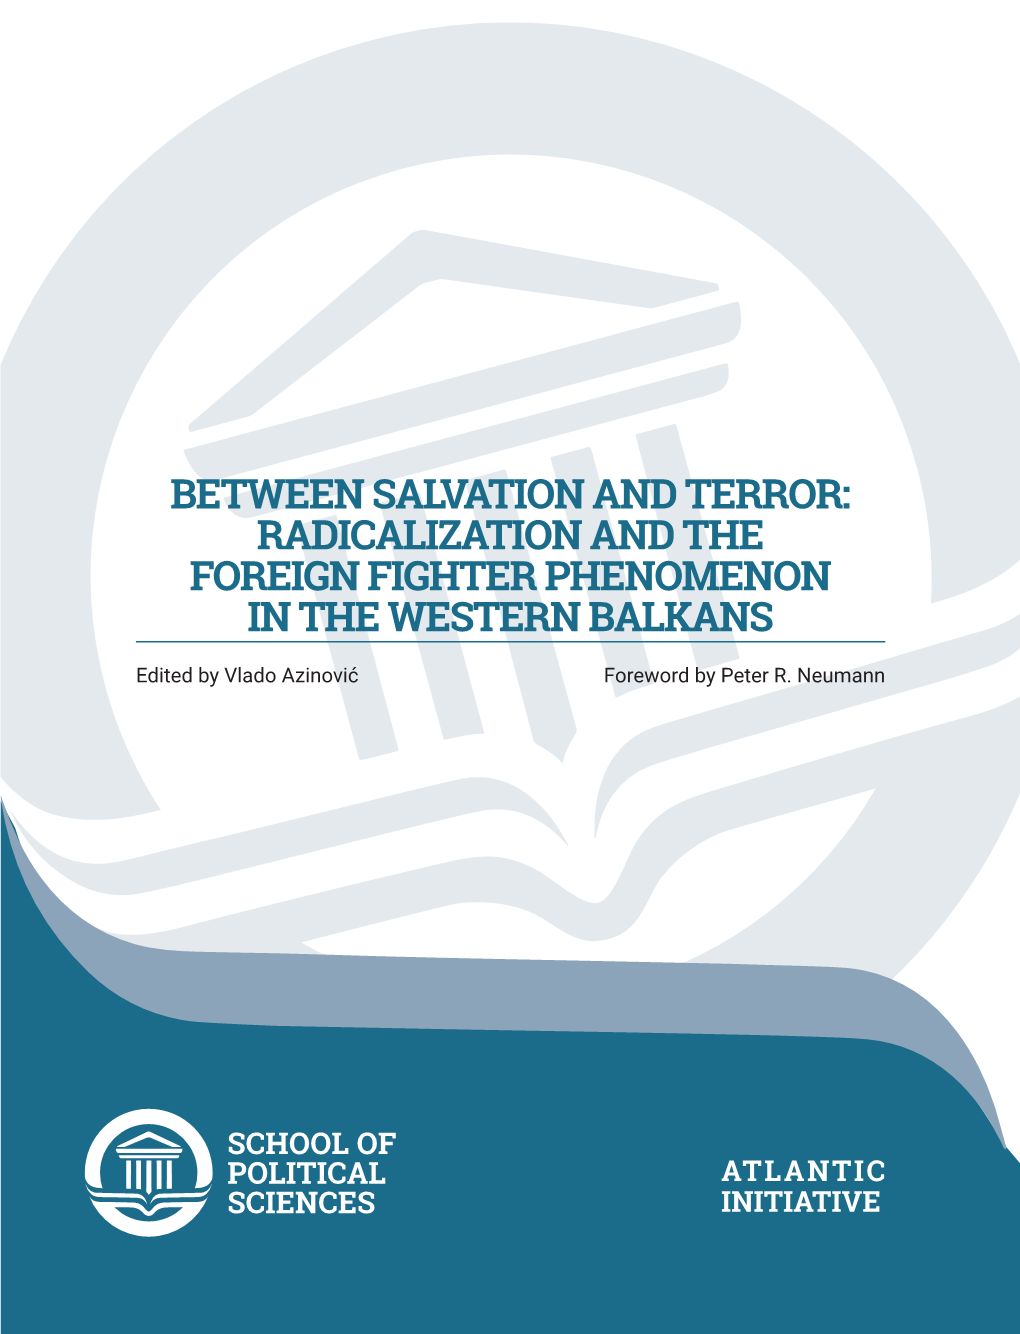 Between Salvation and Terror: Radicalization and the Foreign Fighter Phenomenon in the Western Balkans